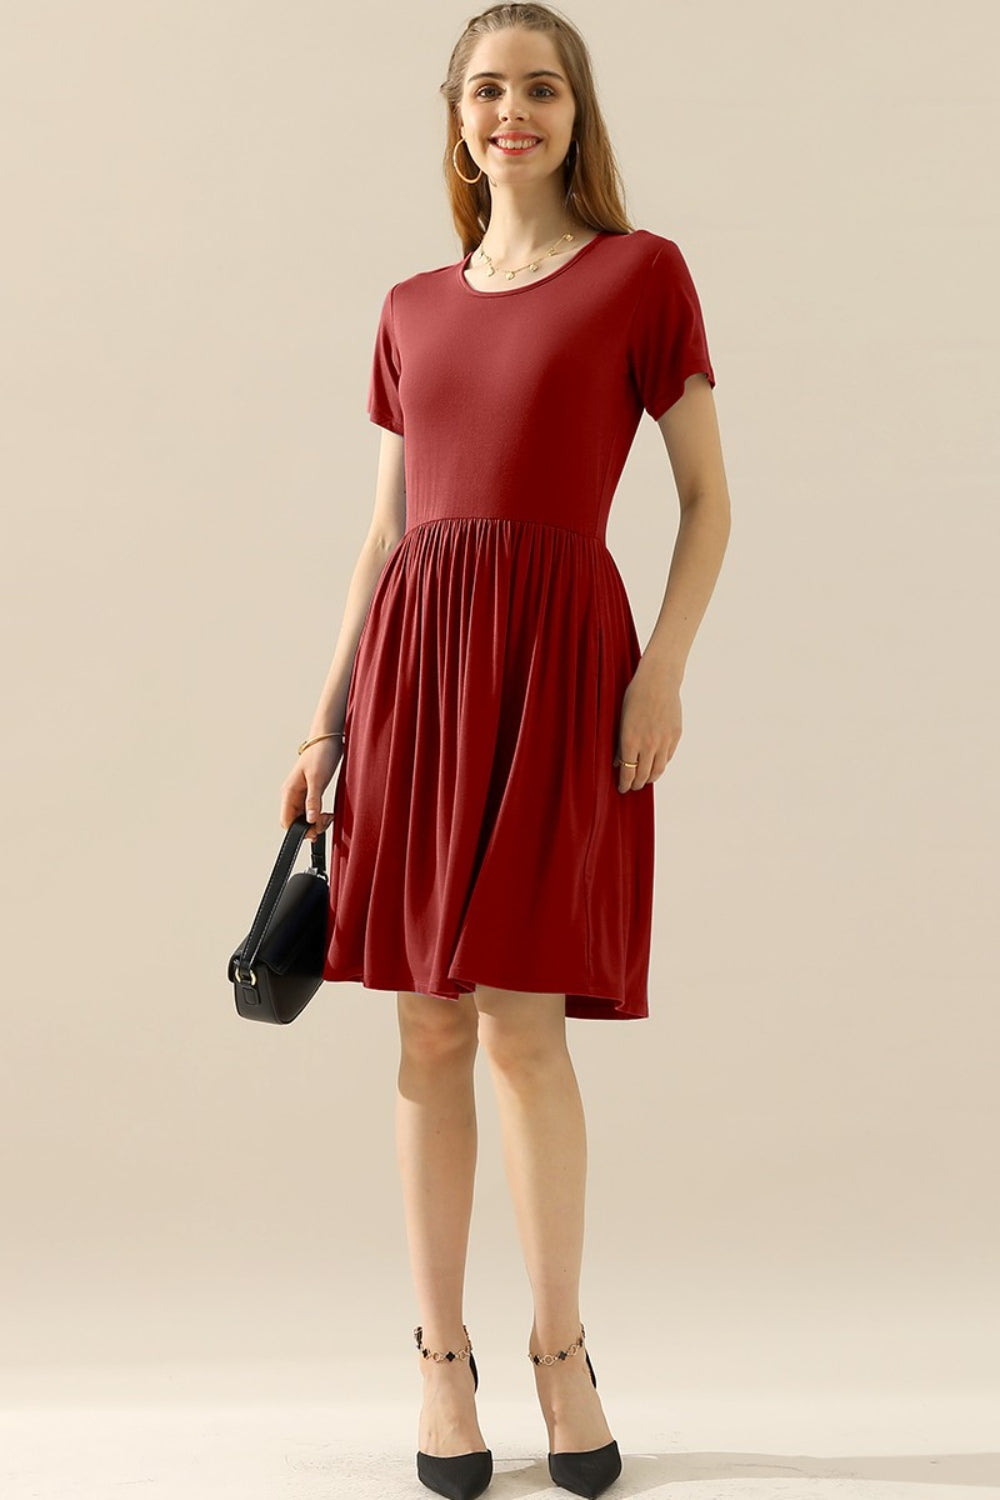 Ninexis Full Size Round Neck Ruched Dress with Pockets - BURGUNDY / S - DRESSES - Mixed